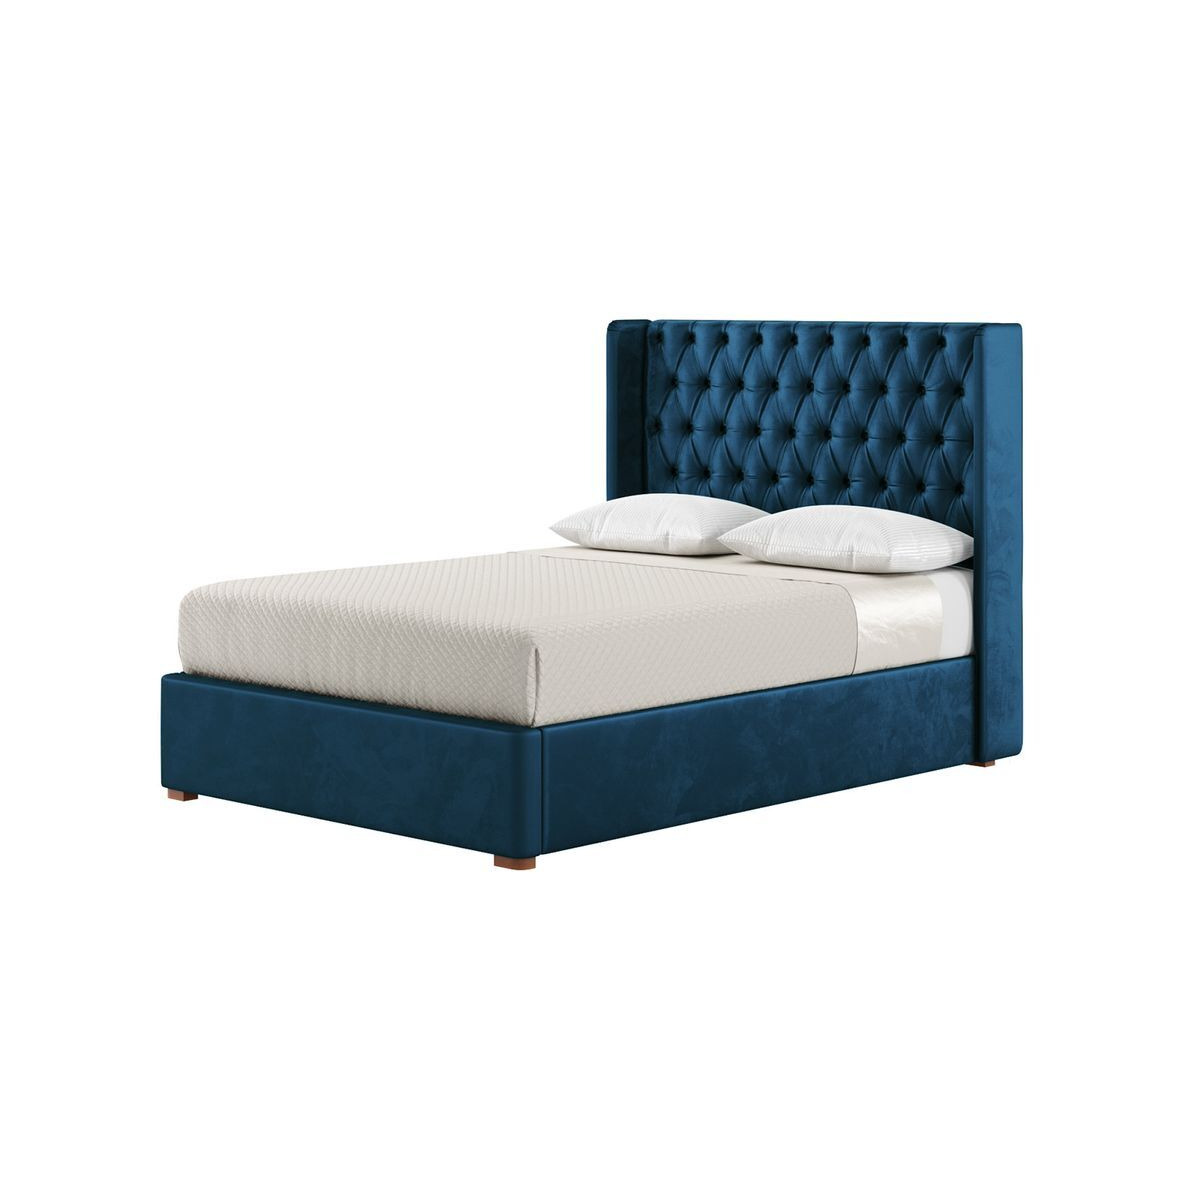 Jewel 4ft6 Double Bed Frame With Luxury Deep Button Quilted Wing Headboard, blue, Leg colour: aveo - image 1